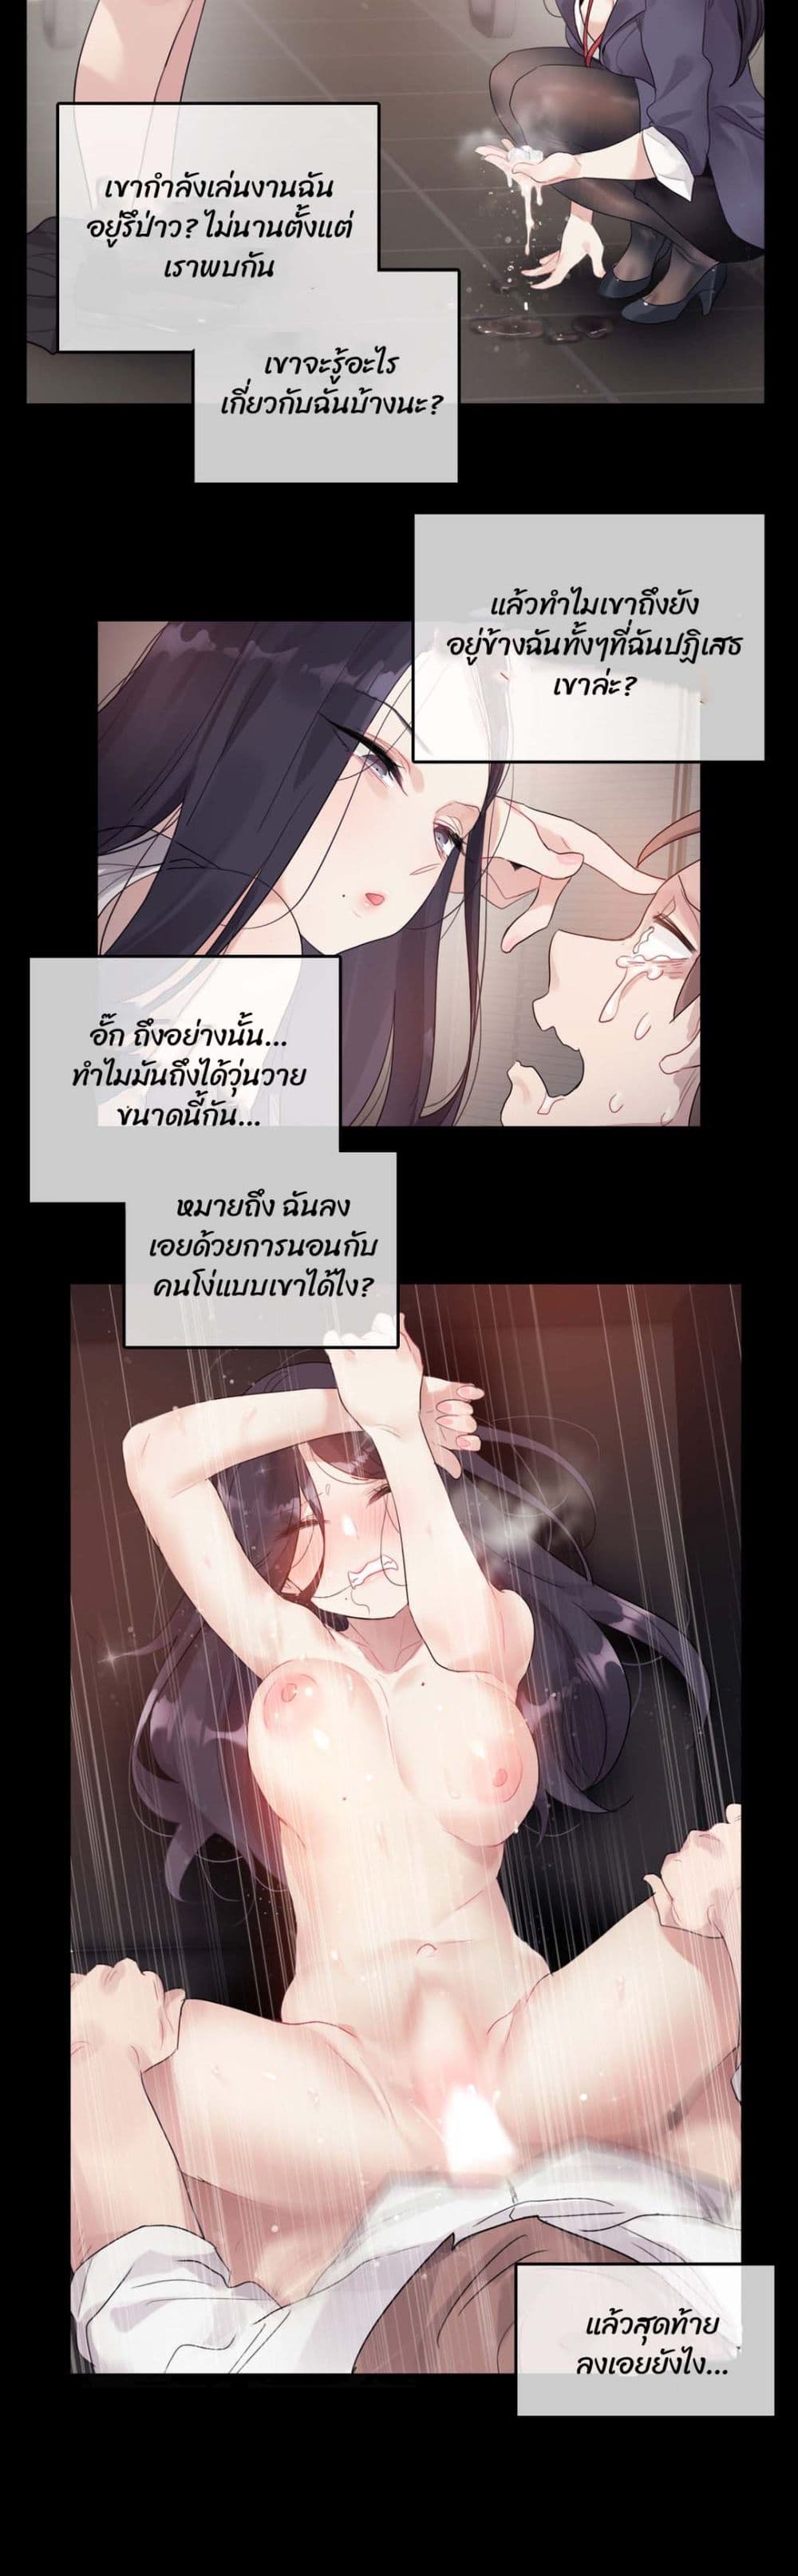 A Pervert's Daily Life 104 (9)